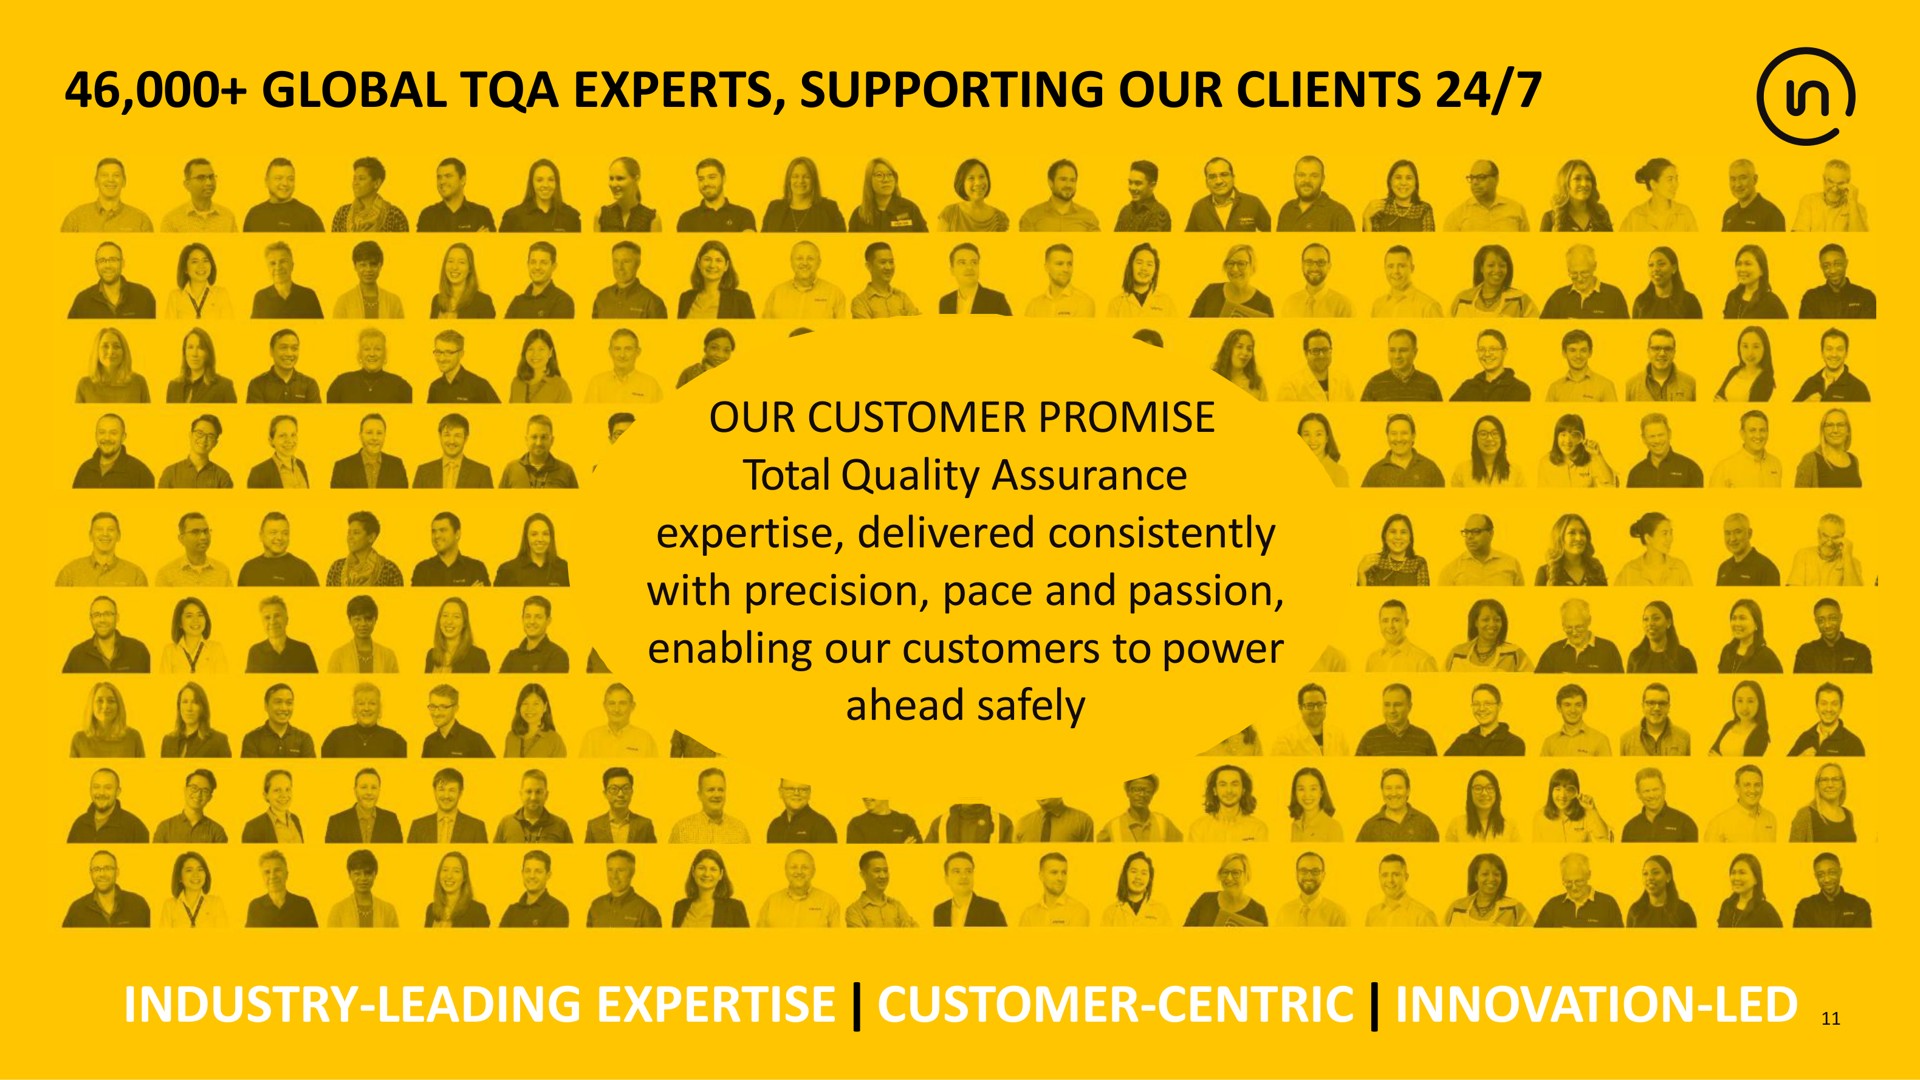 global experts supporting our clients industry leading customer centric innovation led inde tat tite aim dink a daddy total quality assurance ere a a as a in i | Intertek